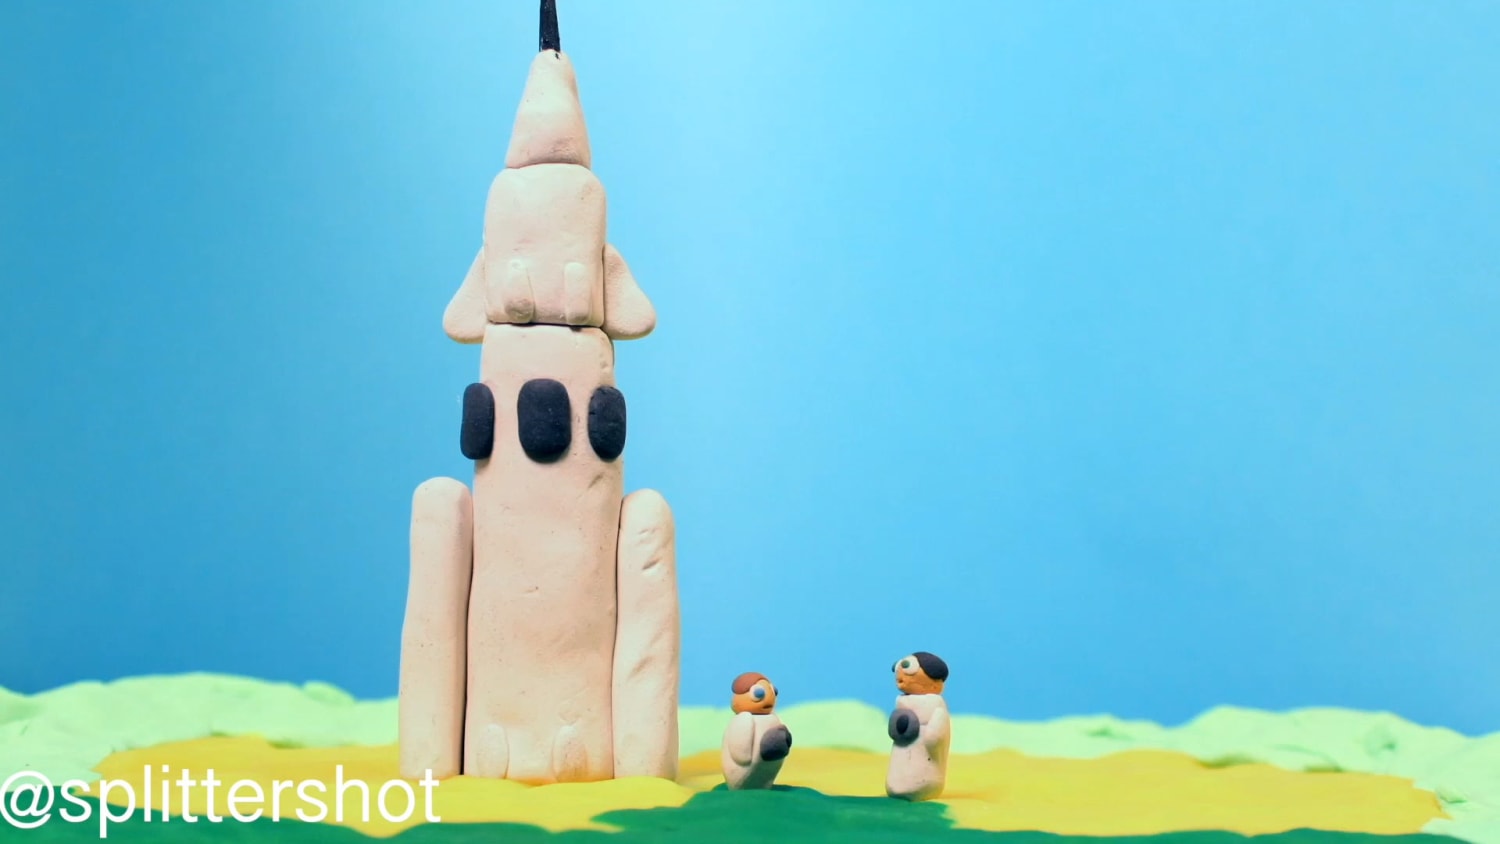 Rocket Launch - Stop Motion Animation I made